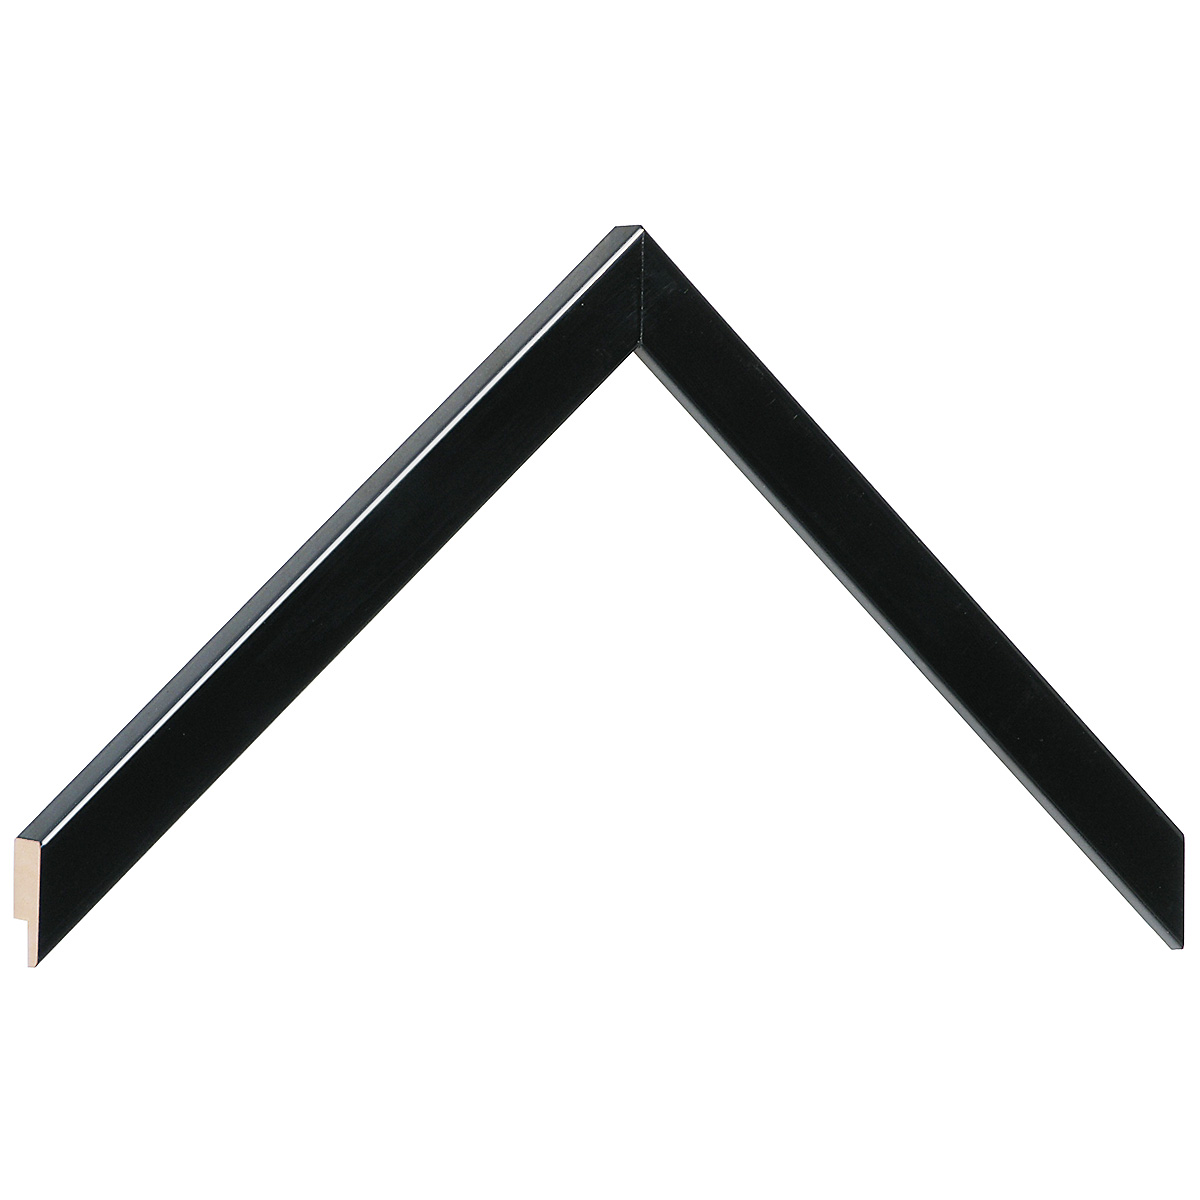 Moulding ayous - width 15mm height 14 - Glossy black - Sample